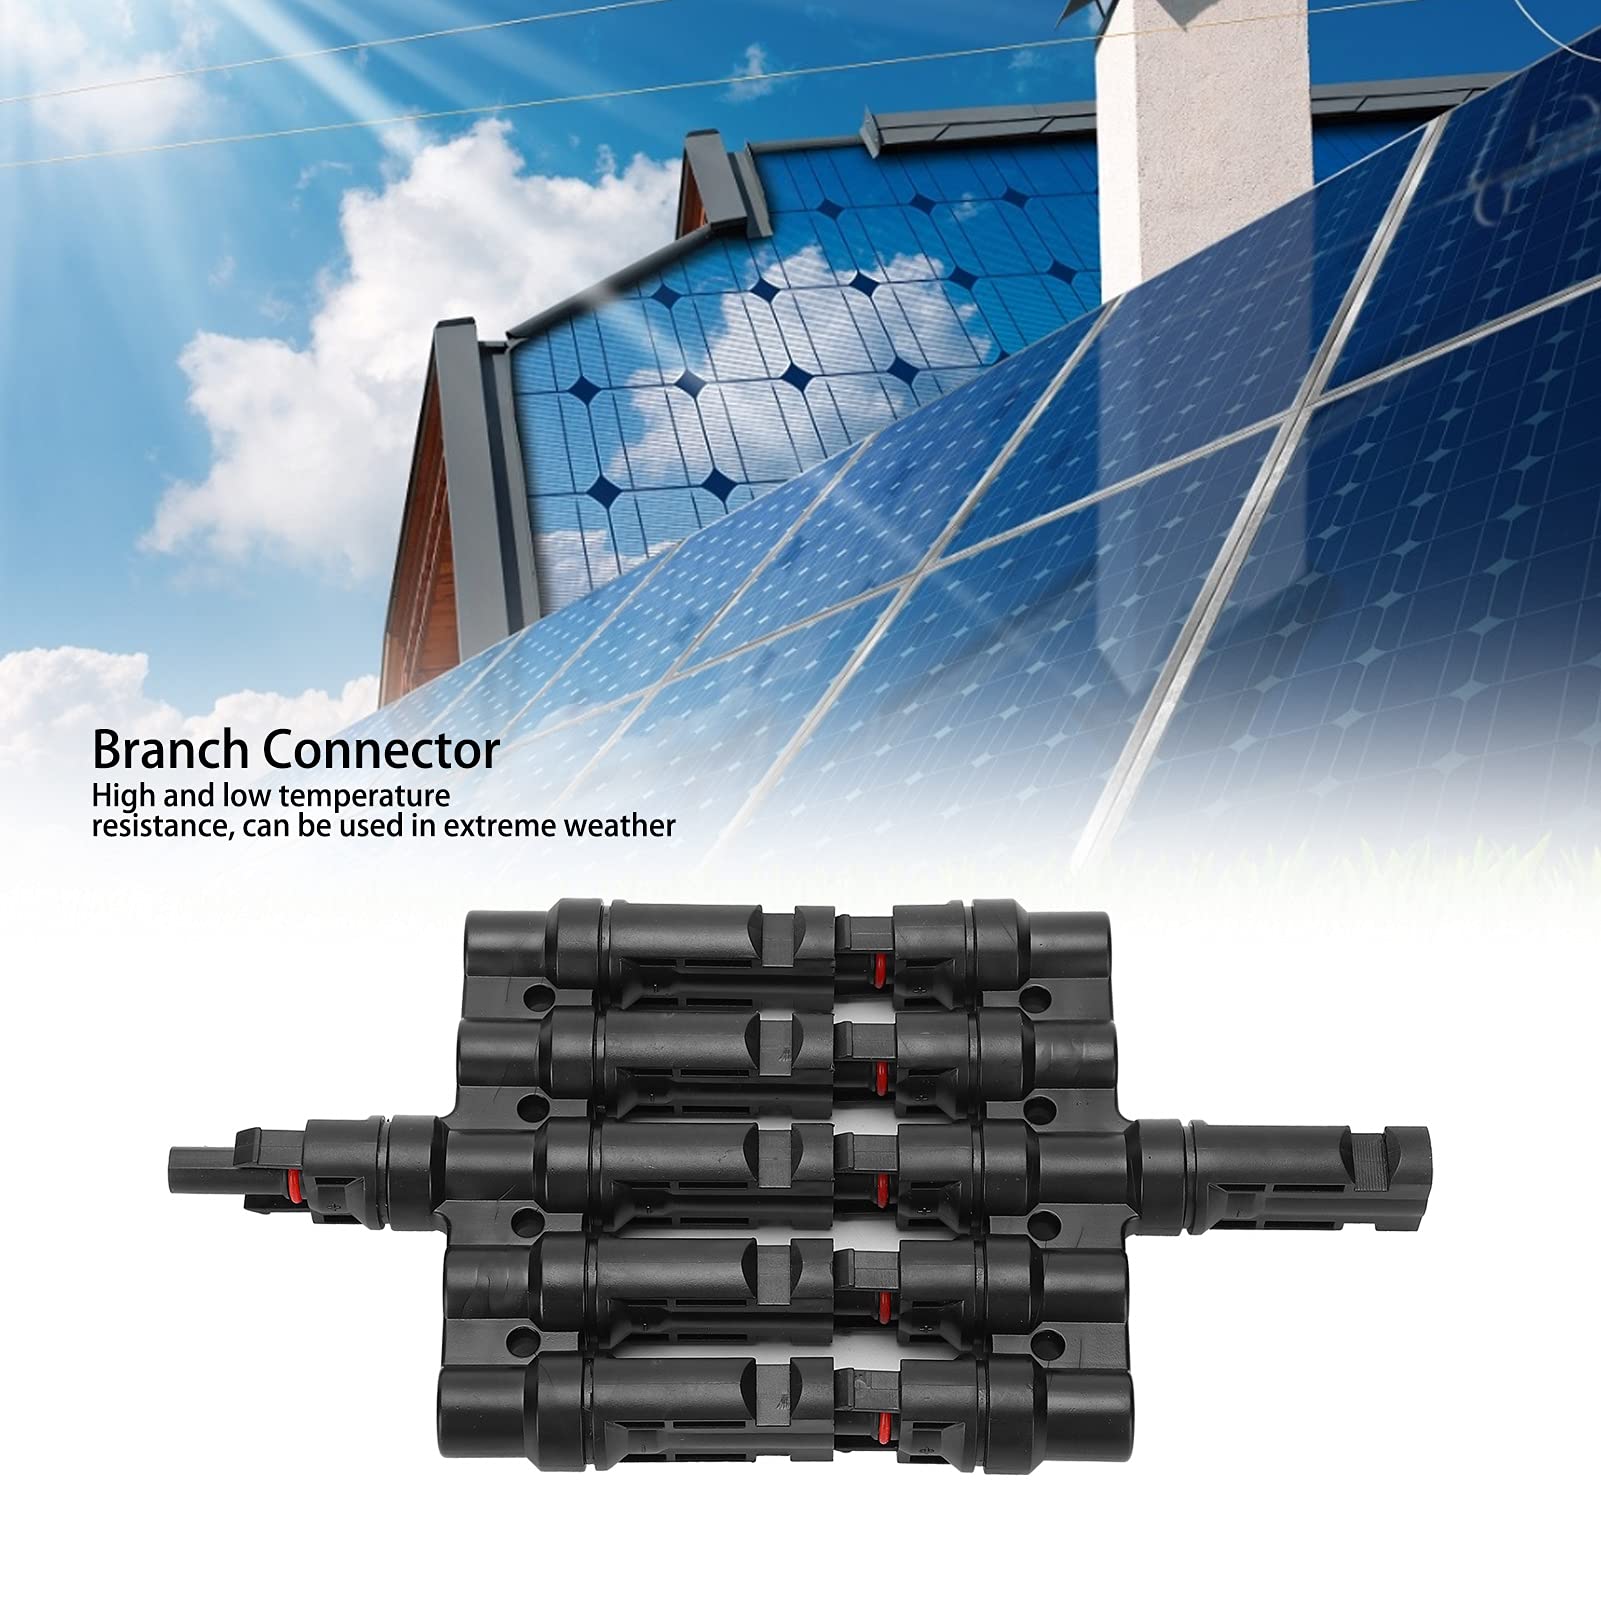 2PCS Branch Connector, Branch Connector to Strengthen The Stability, Waterproof and Dustproof 5 to 1 Solar Panel, PPO Insulation Material, for Solar Panel Cable